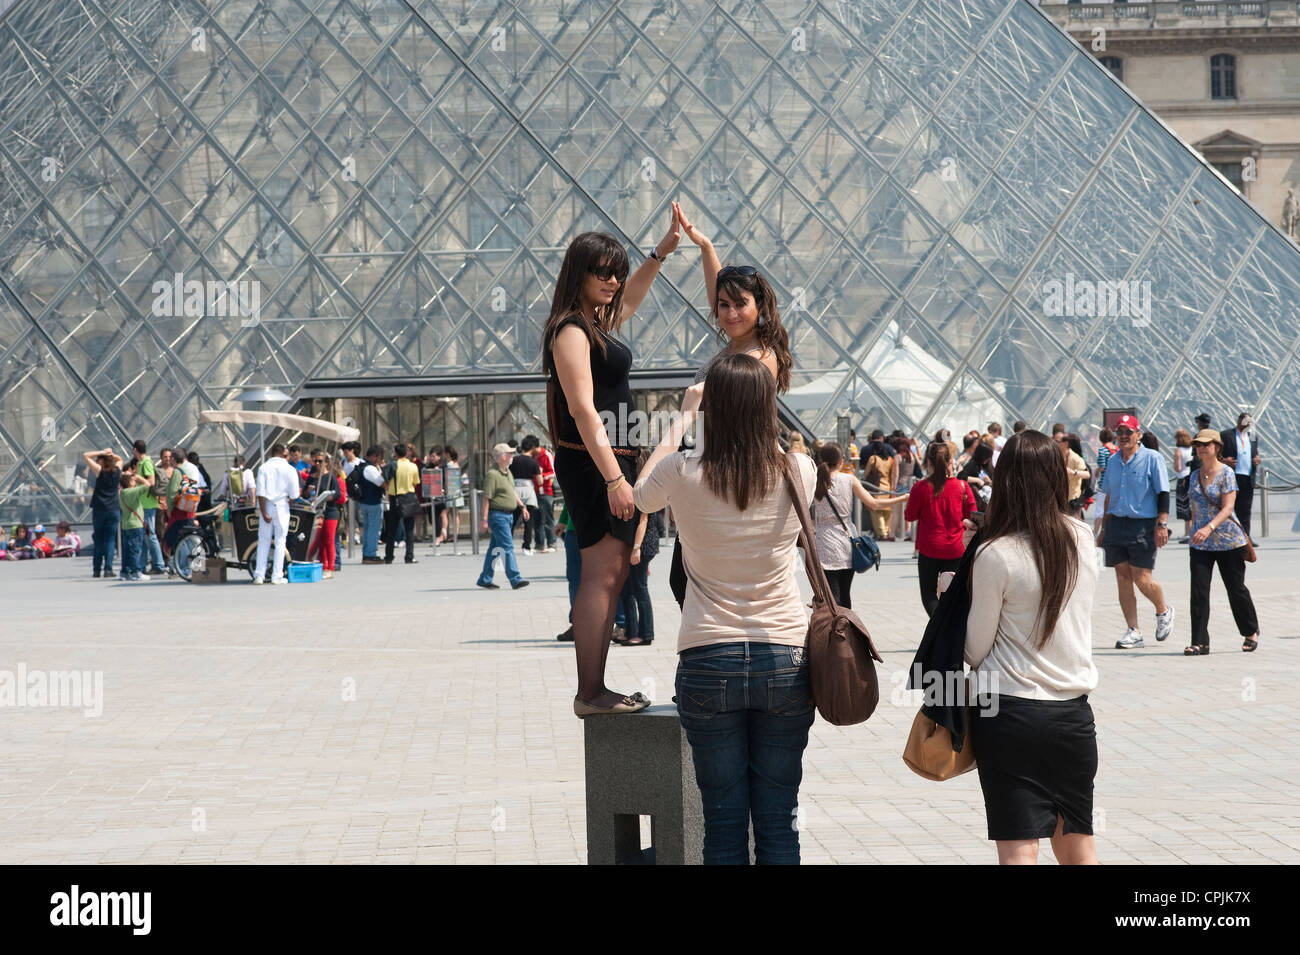 Paris, France - Tourists have picture taken of themselves in front of the Louvre museum Stock Photo